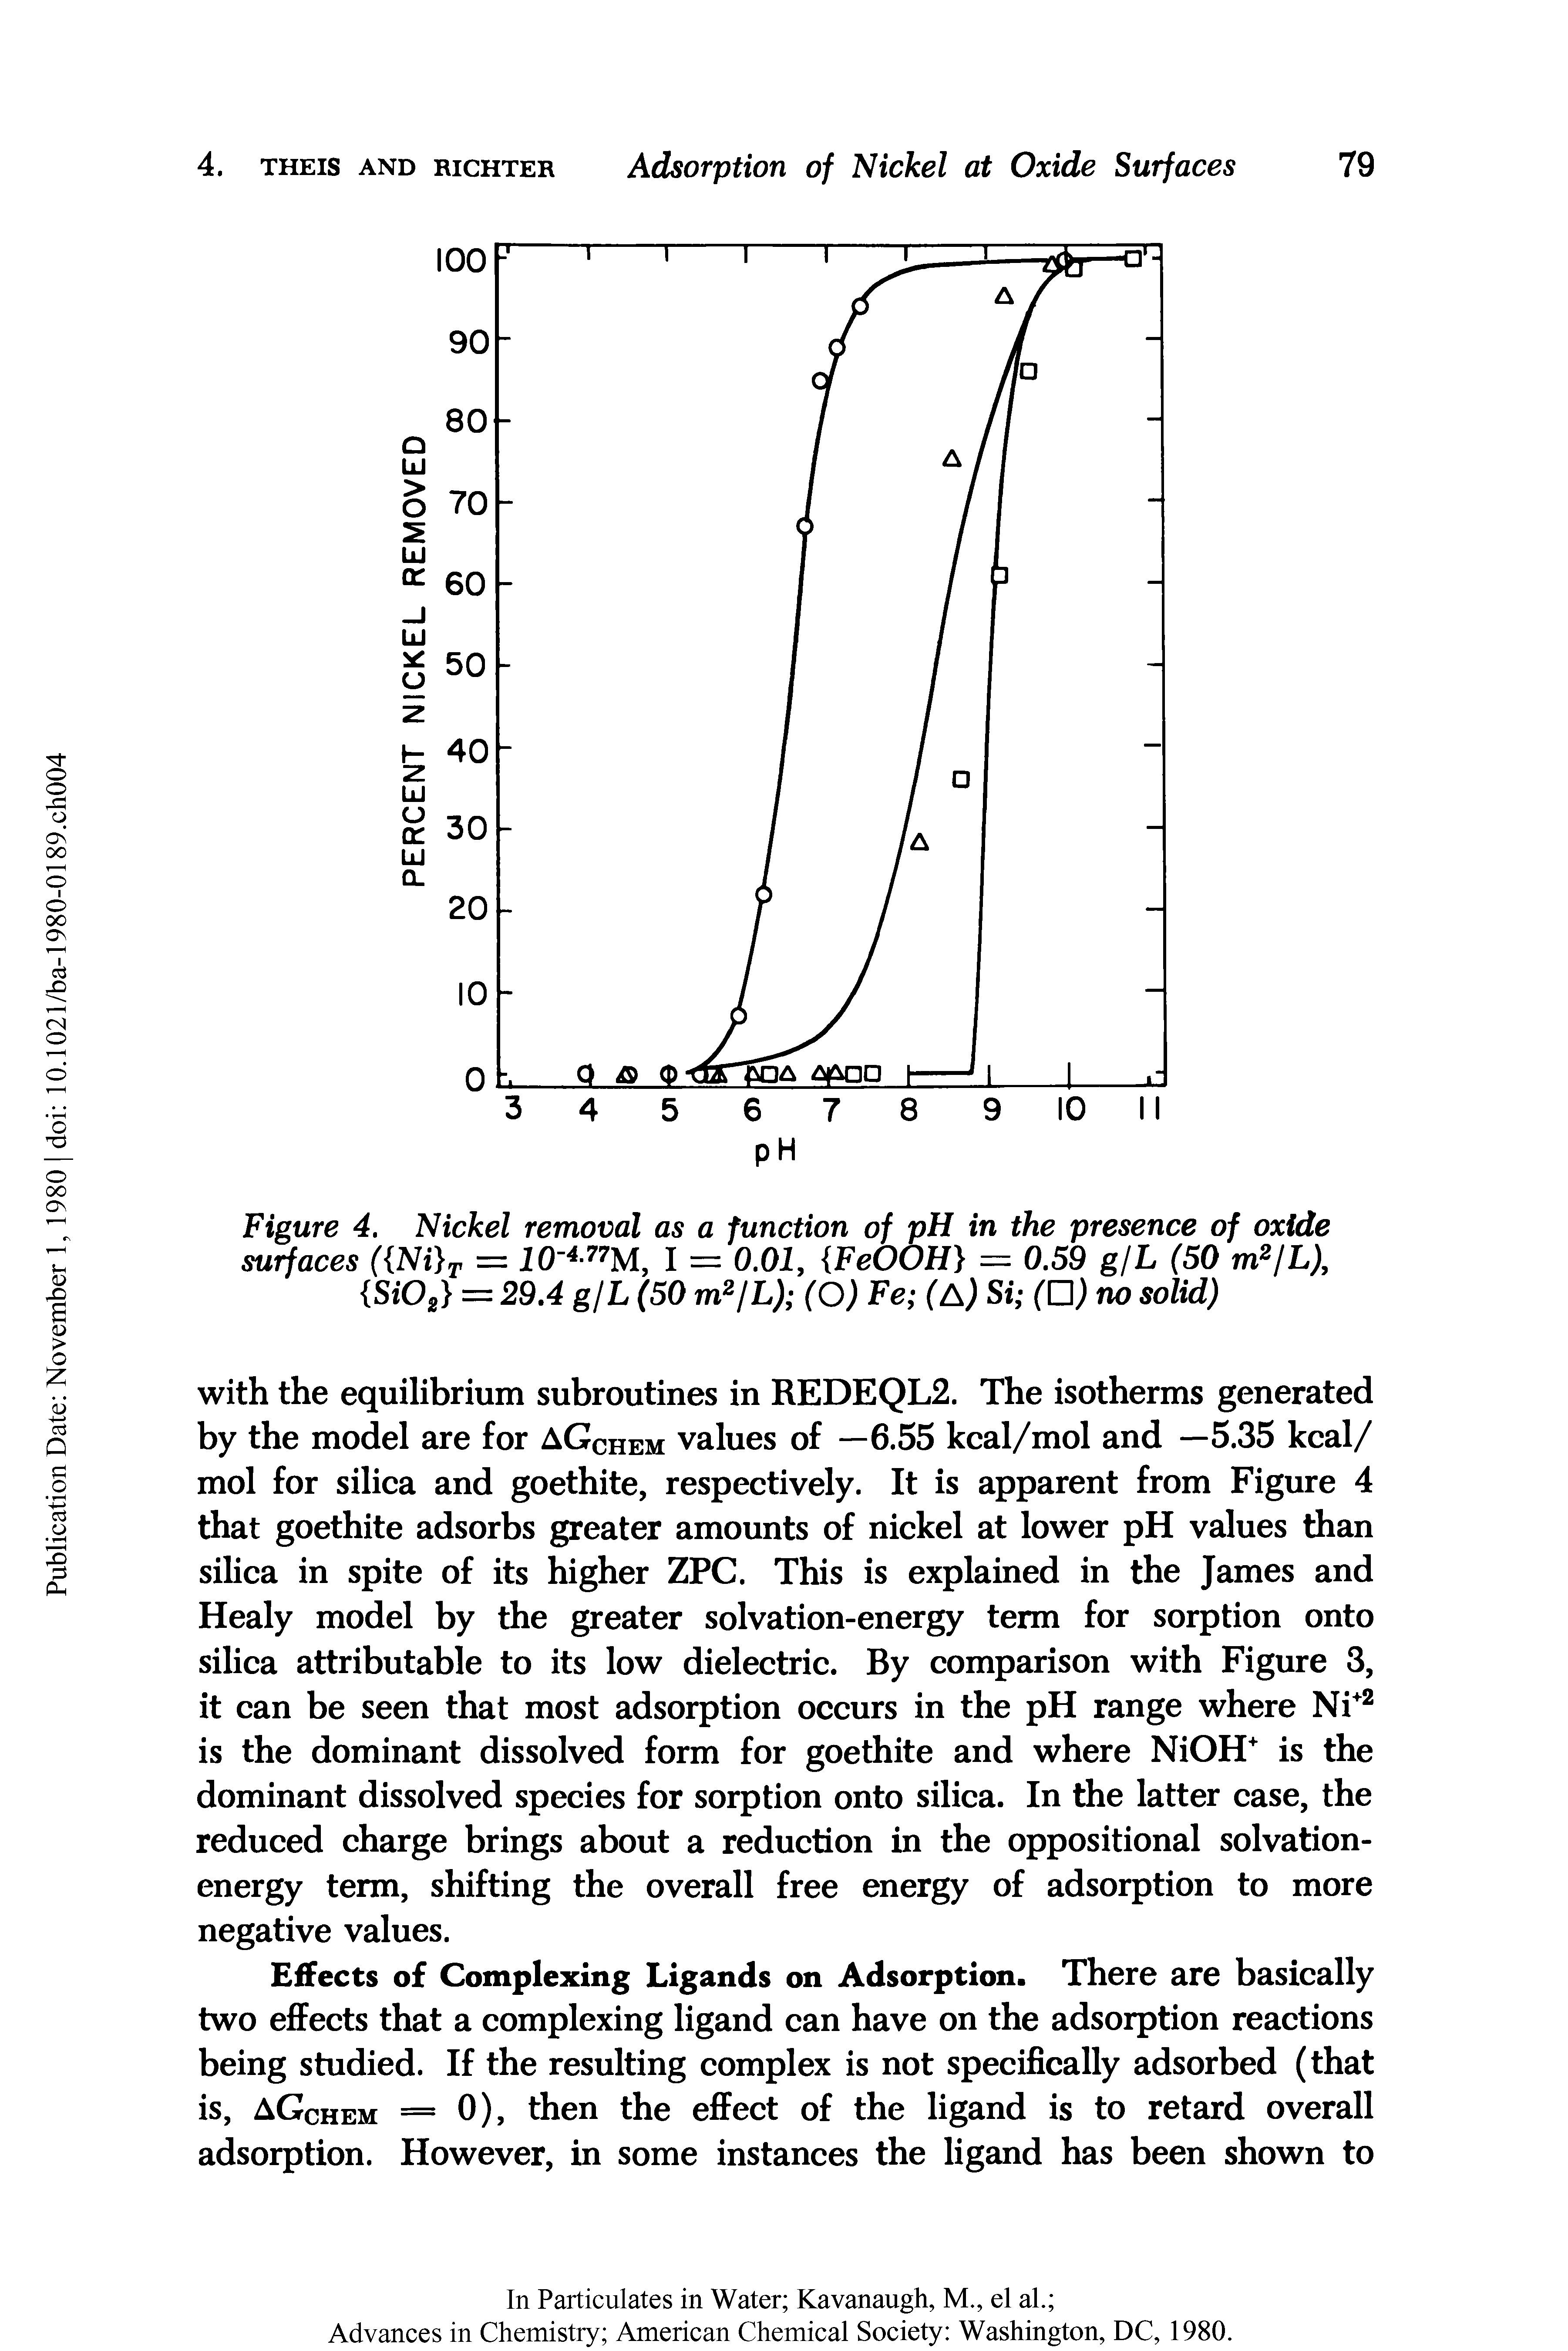 Figure 4. Nickel removal as a function of pH in the presence of oxide surfaces I = 0.01, FeOOH = 0.59 gjh (50 m /L),...